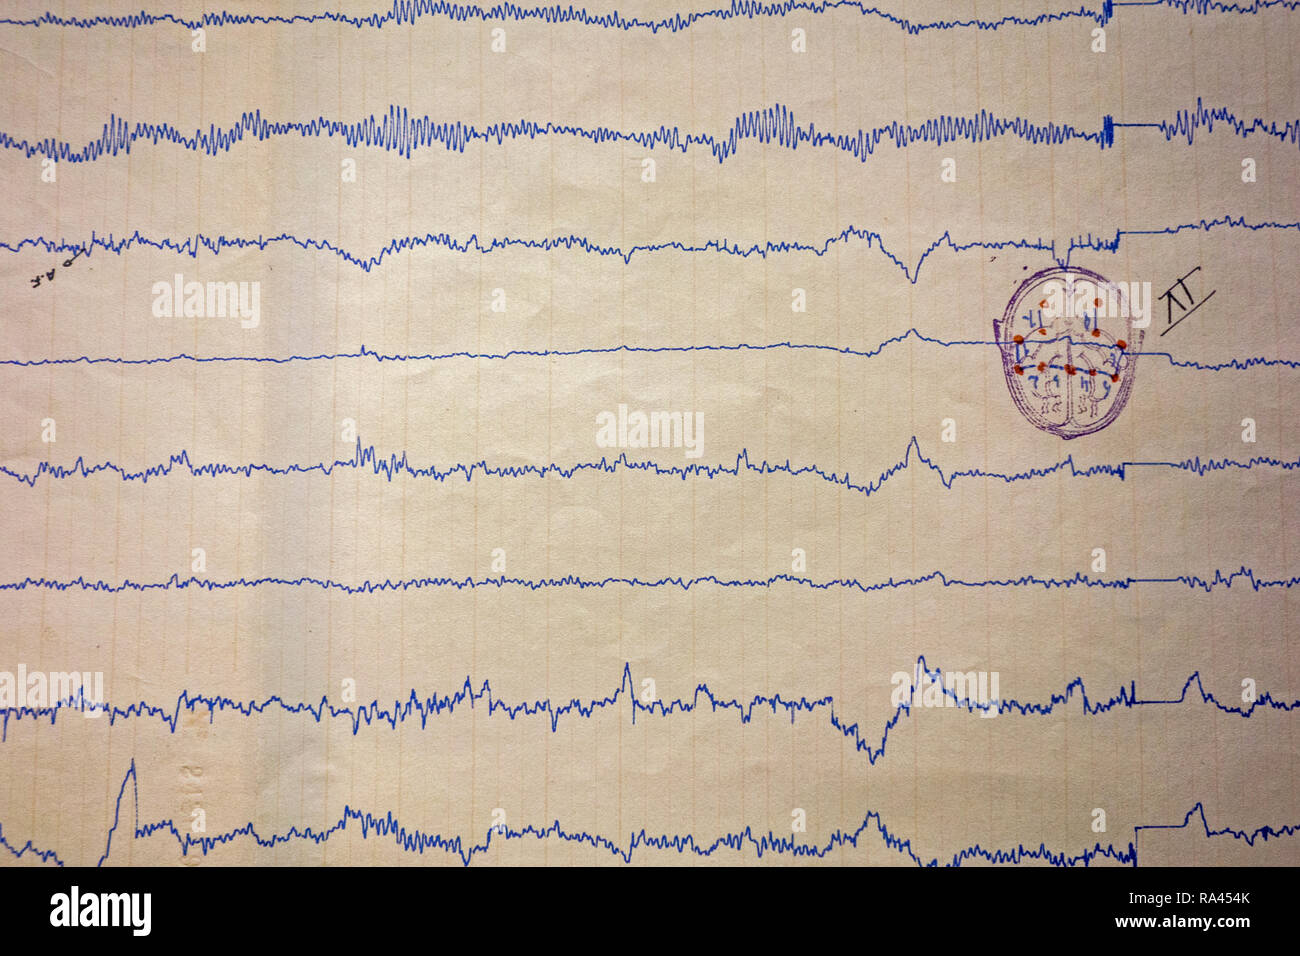 Readout from 20th century polygraph / lie detector showing physiological responses from interrogated suspect Stock Photo